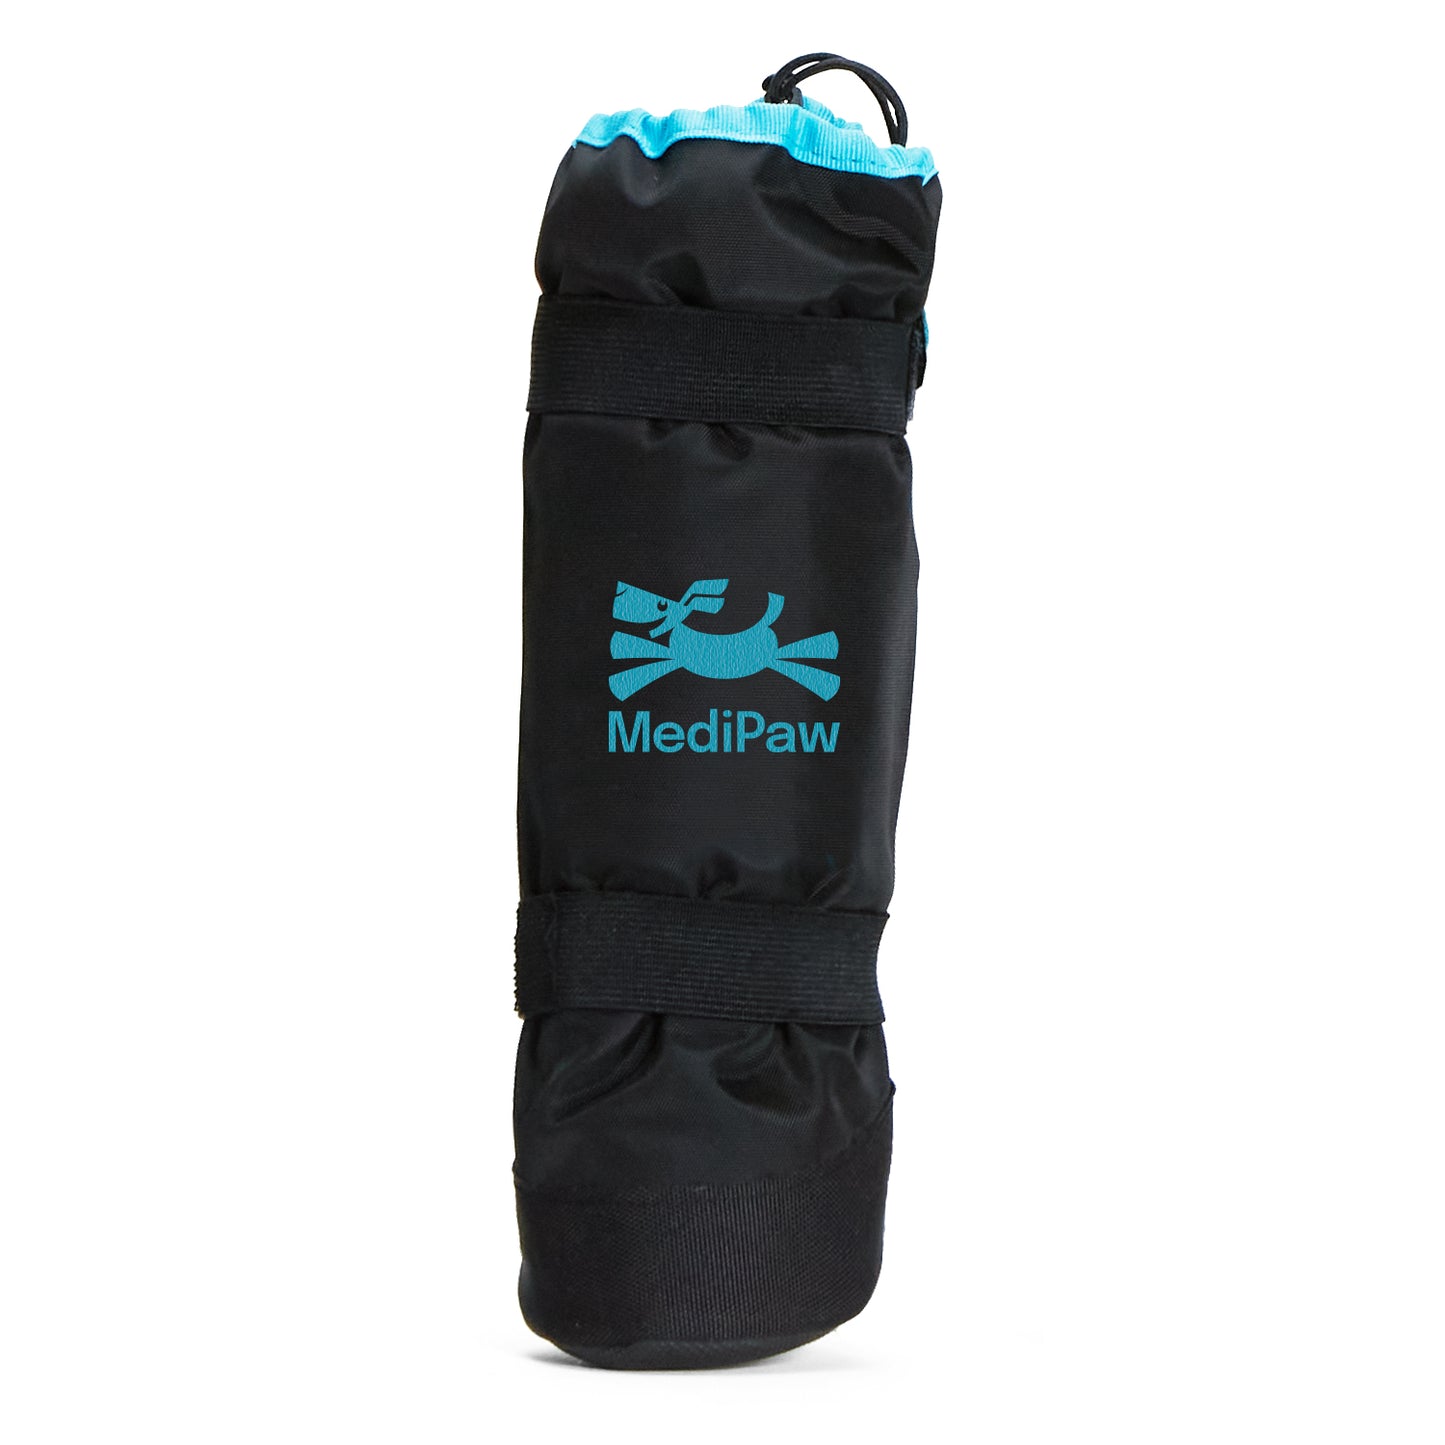 Medpaw offers a wide range of Your Whole Dog MediPaw: Soft Bandage (Basic) Boots.